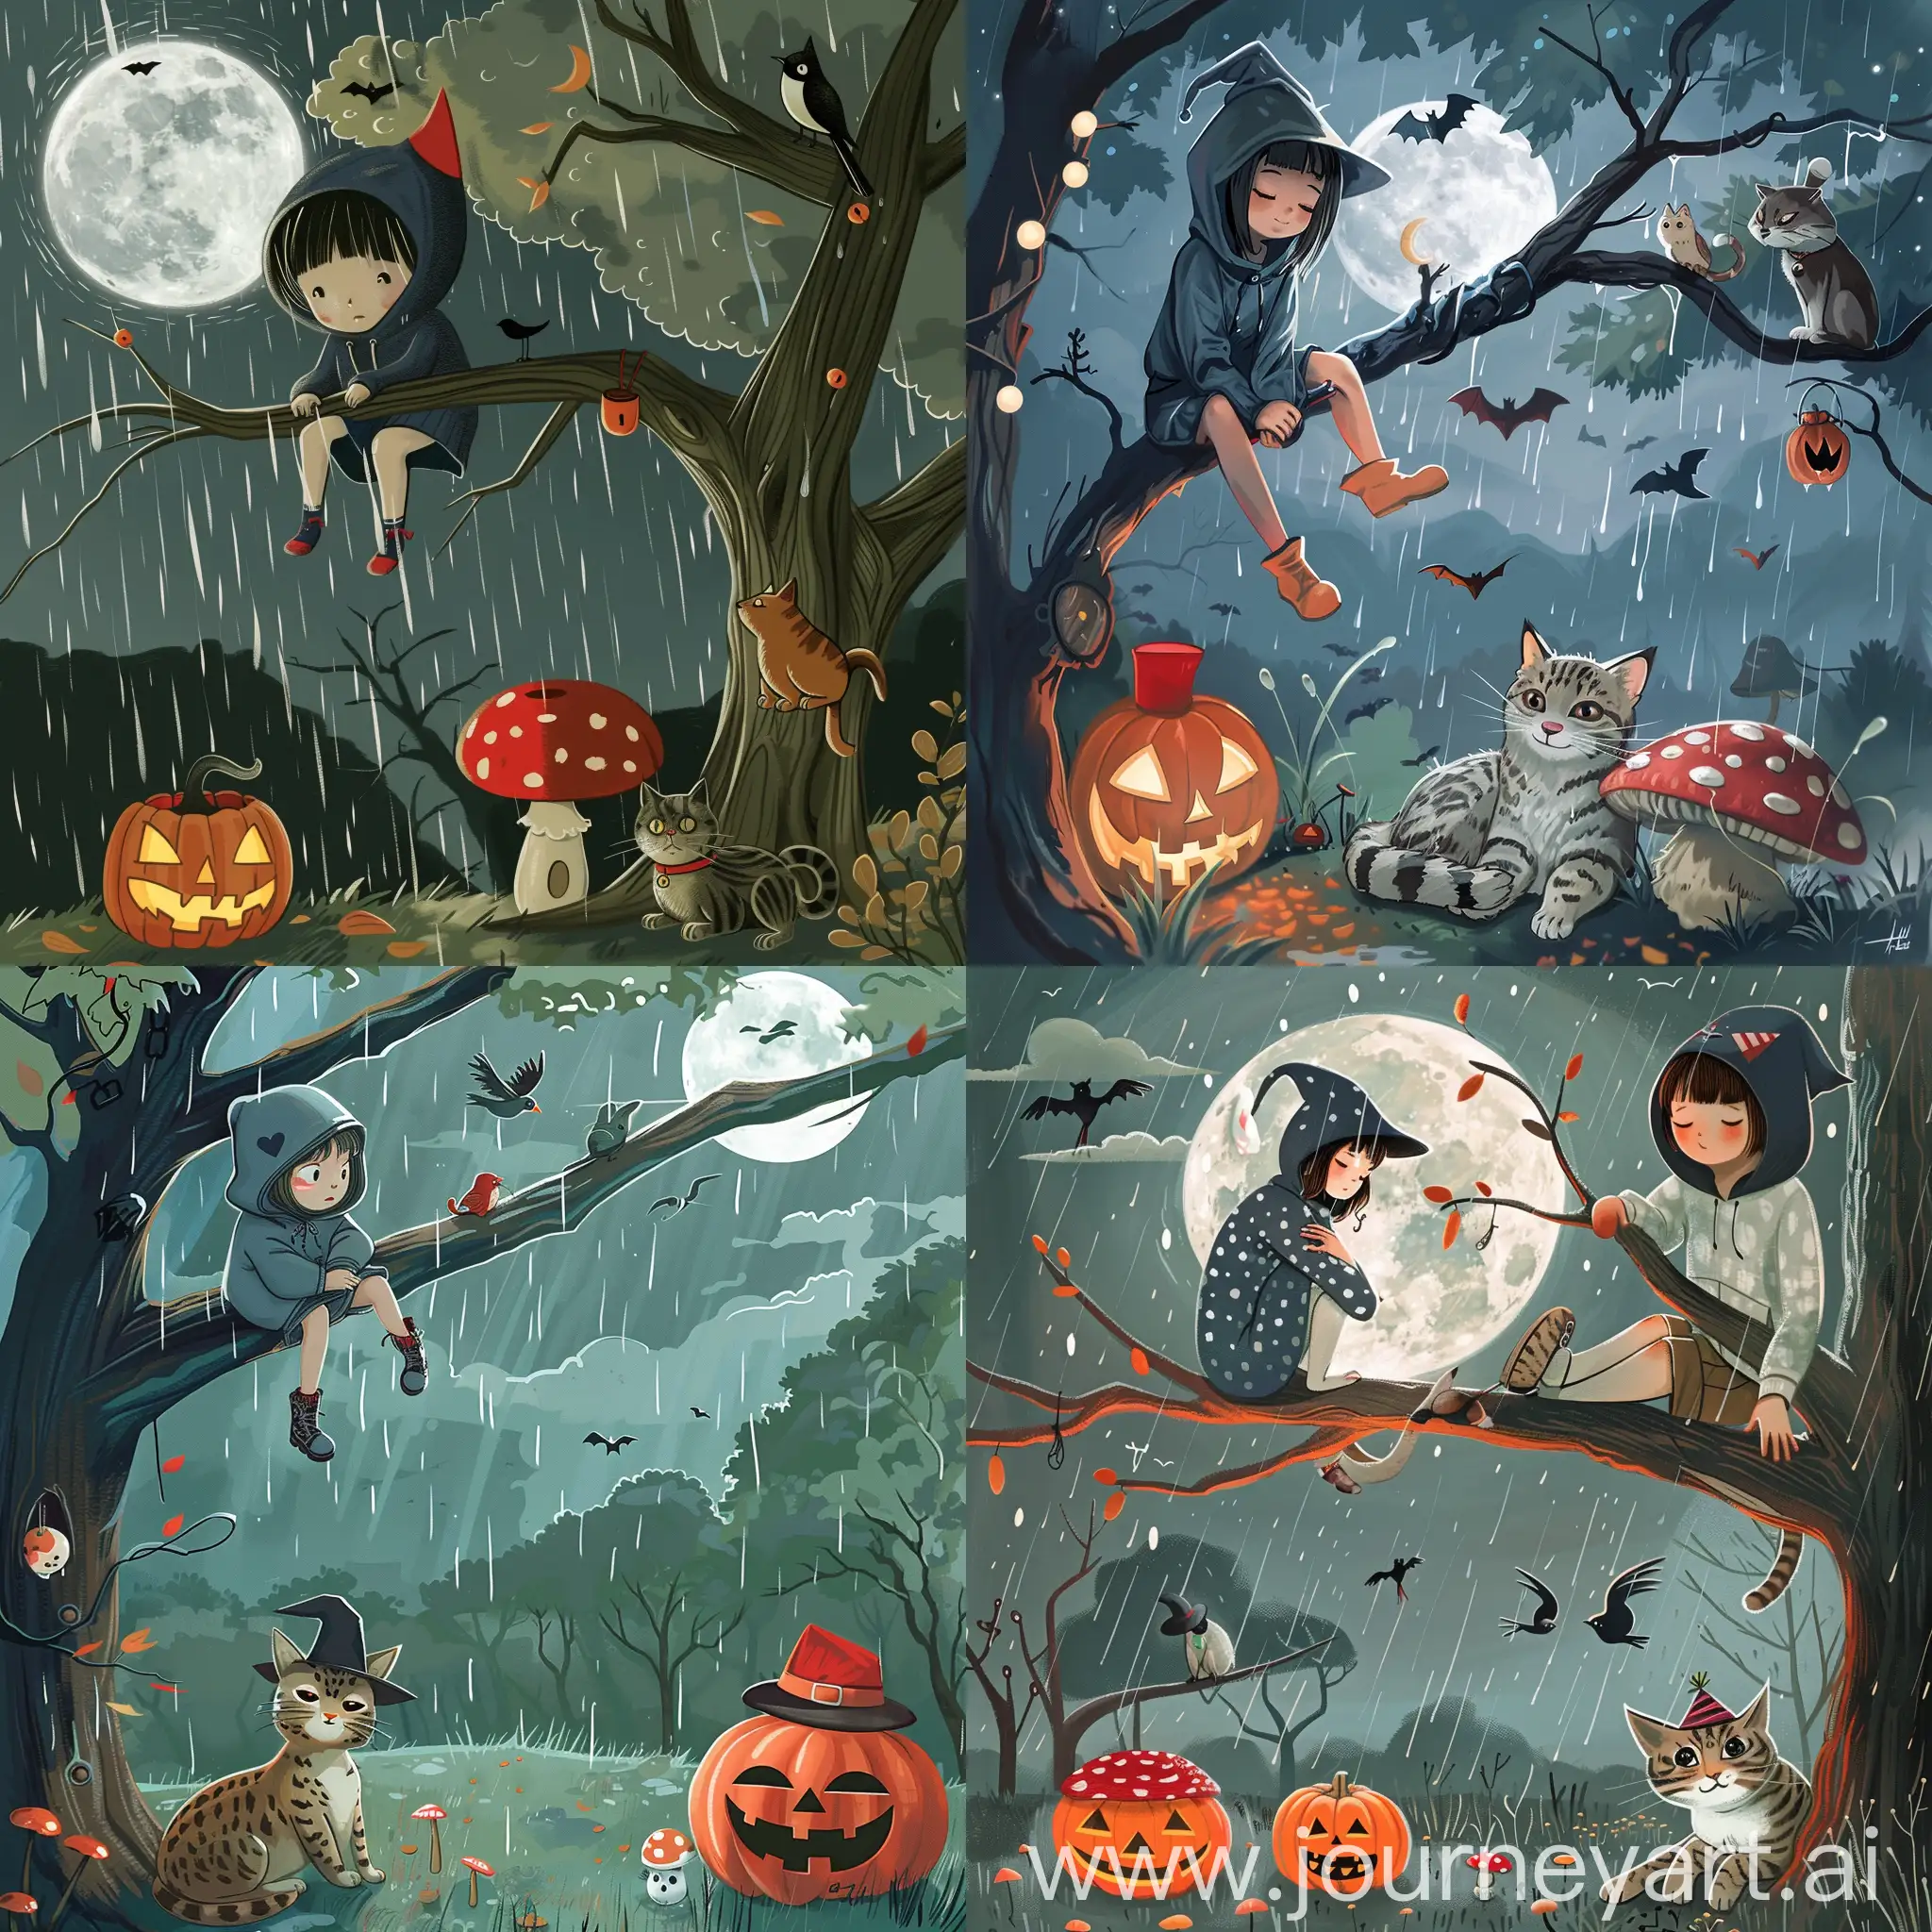 Magical-Moonlit-Woodland-Young-Witch-and-Wildcat-Amidst-Rain-and-Jack-O-Lantern